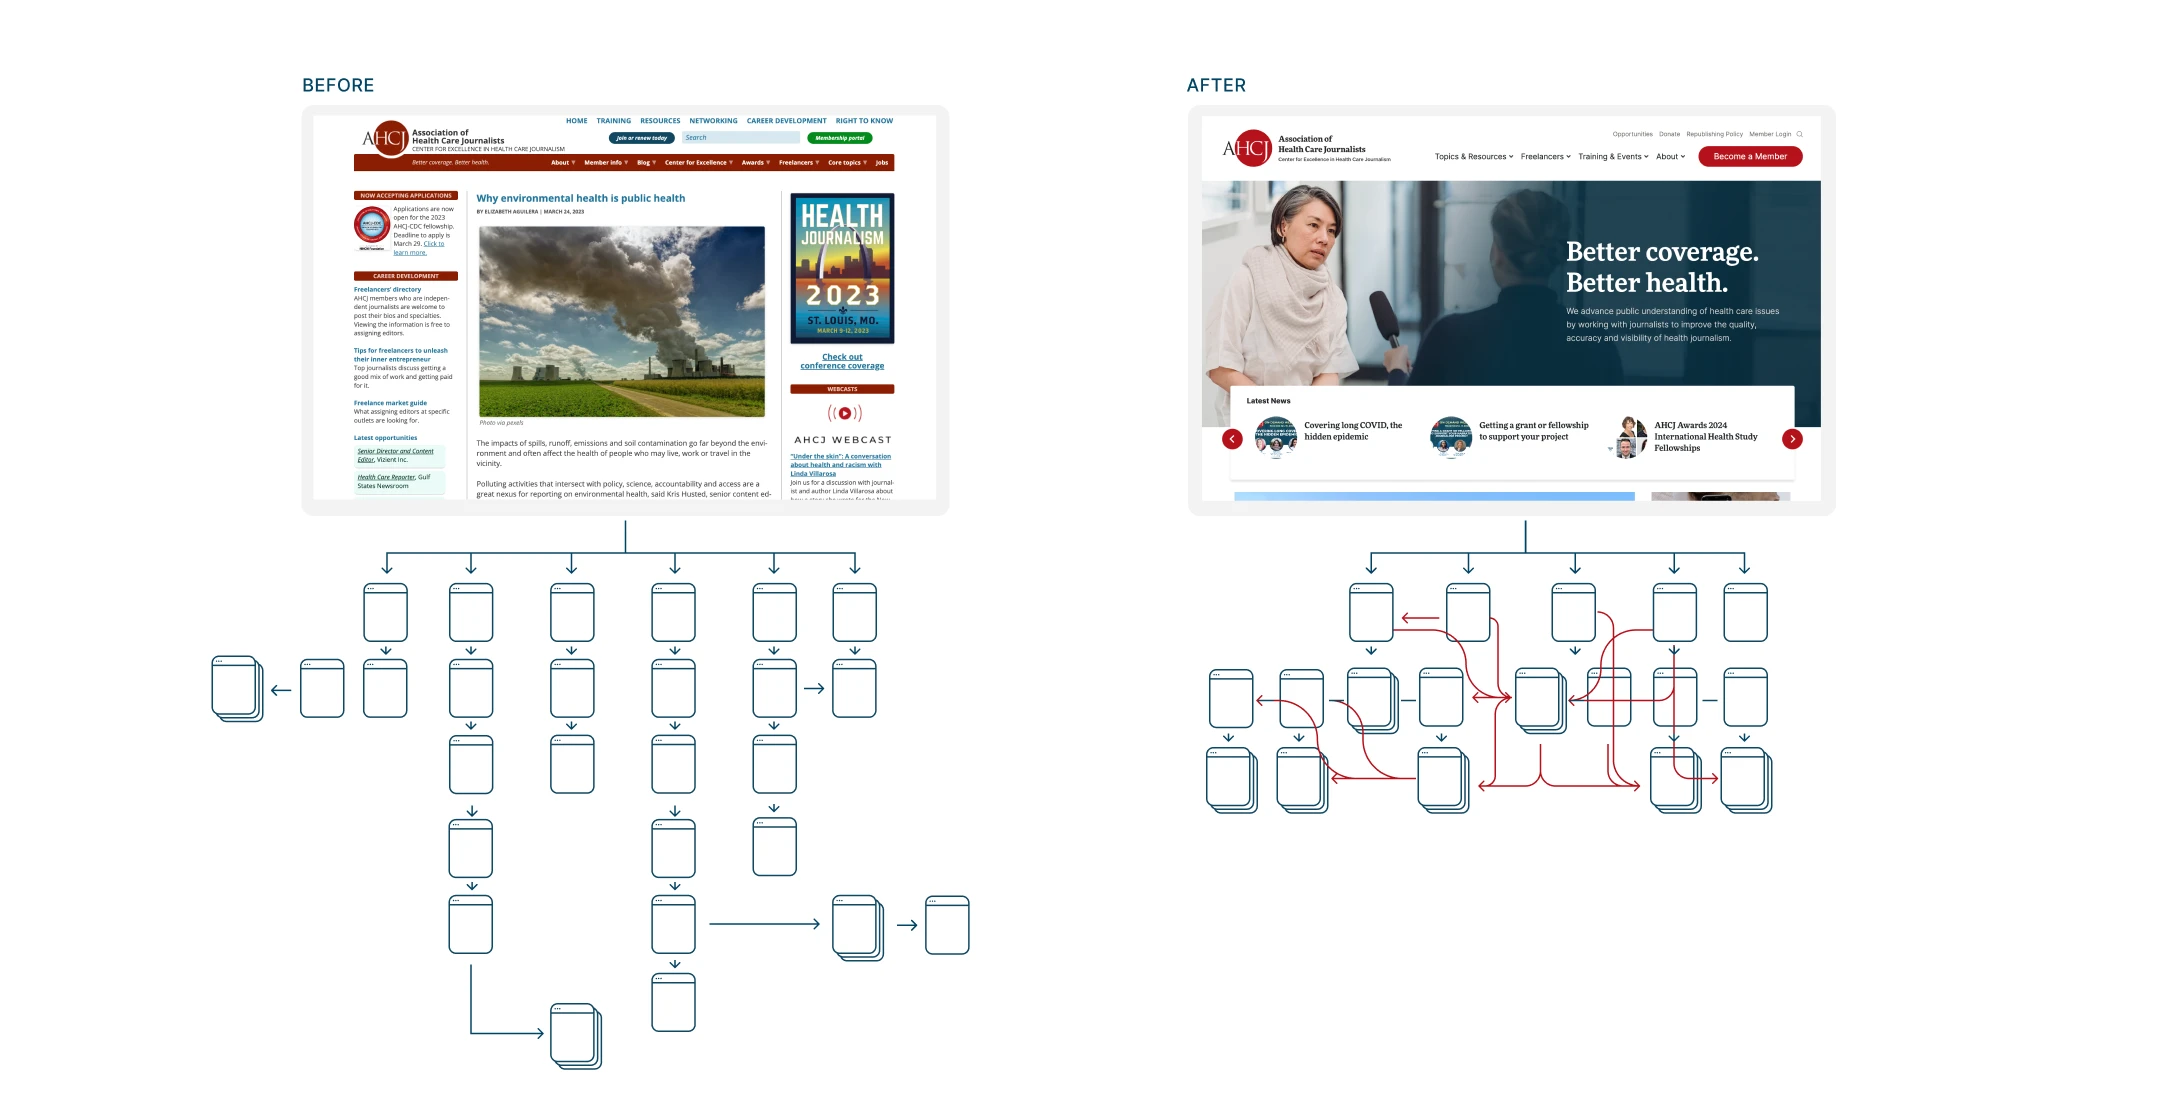 A comparison of the previous Association of Health Care Journalism's site architecture to the newly designed architecture.